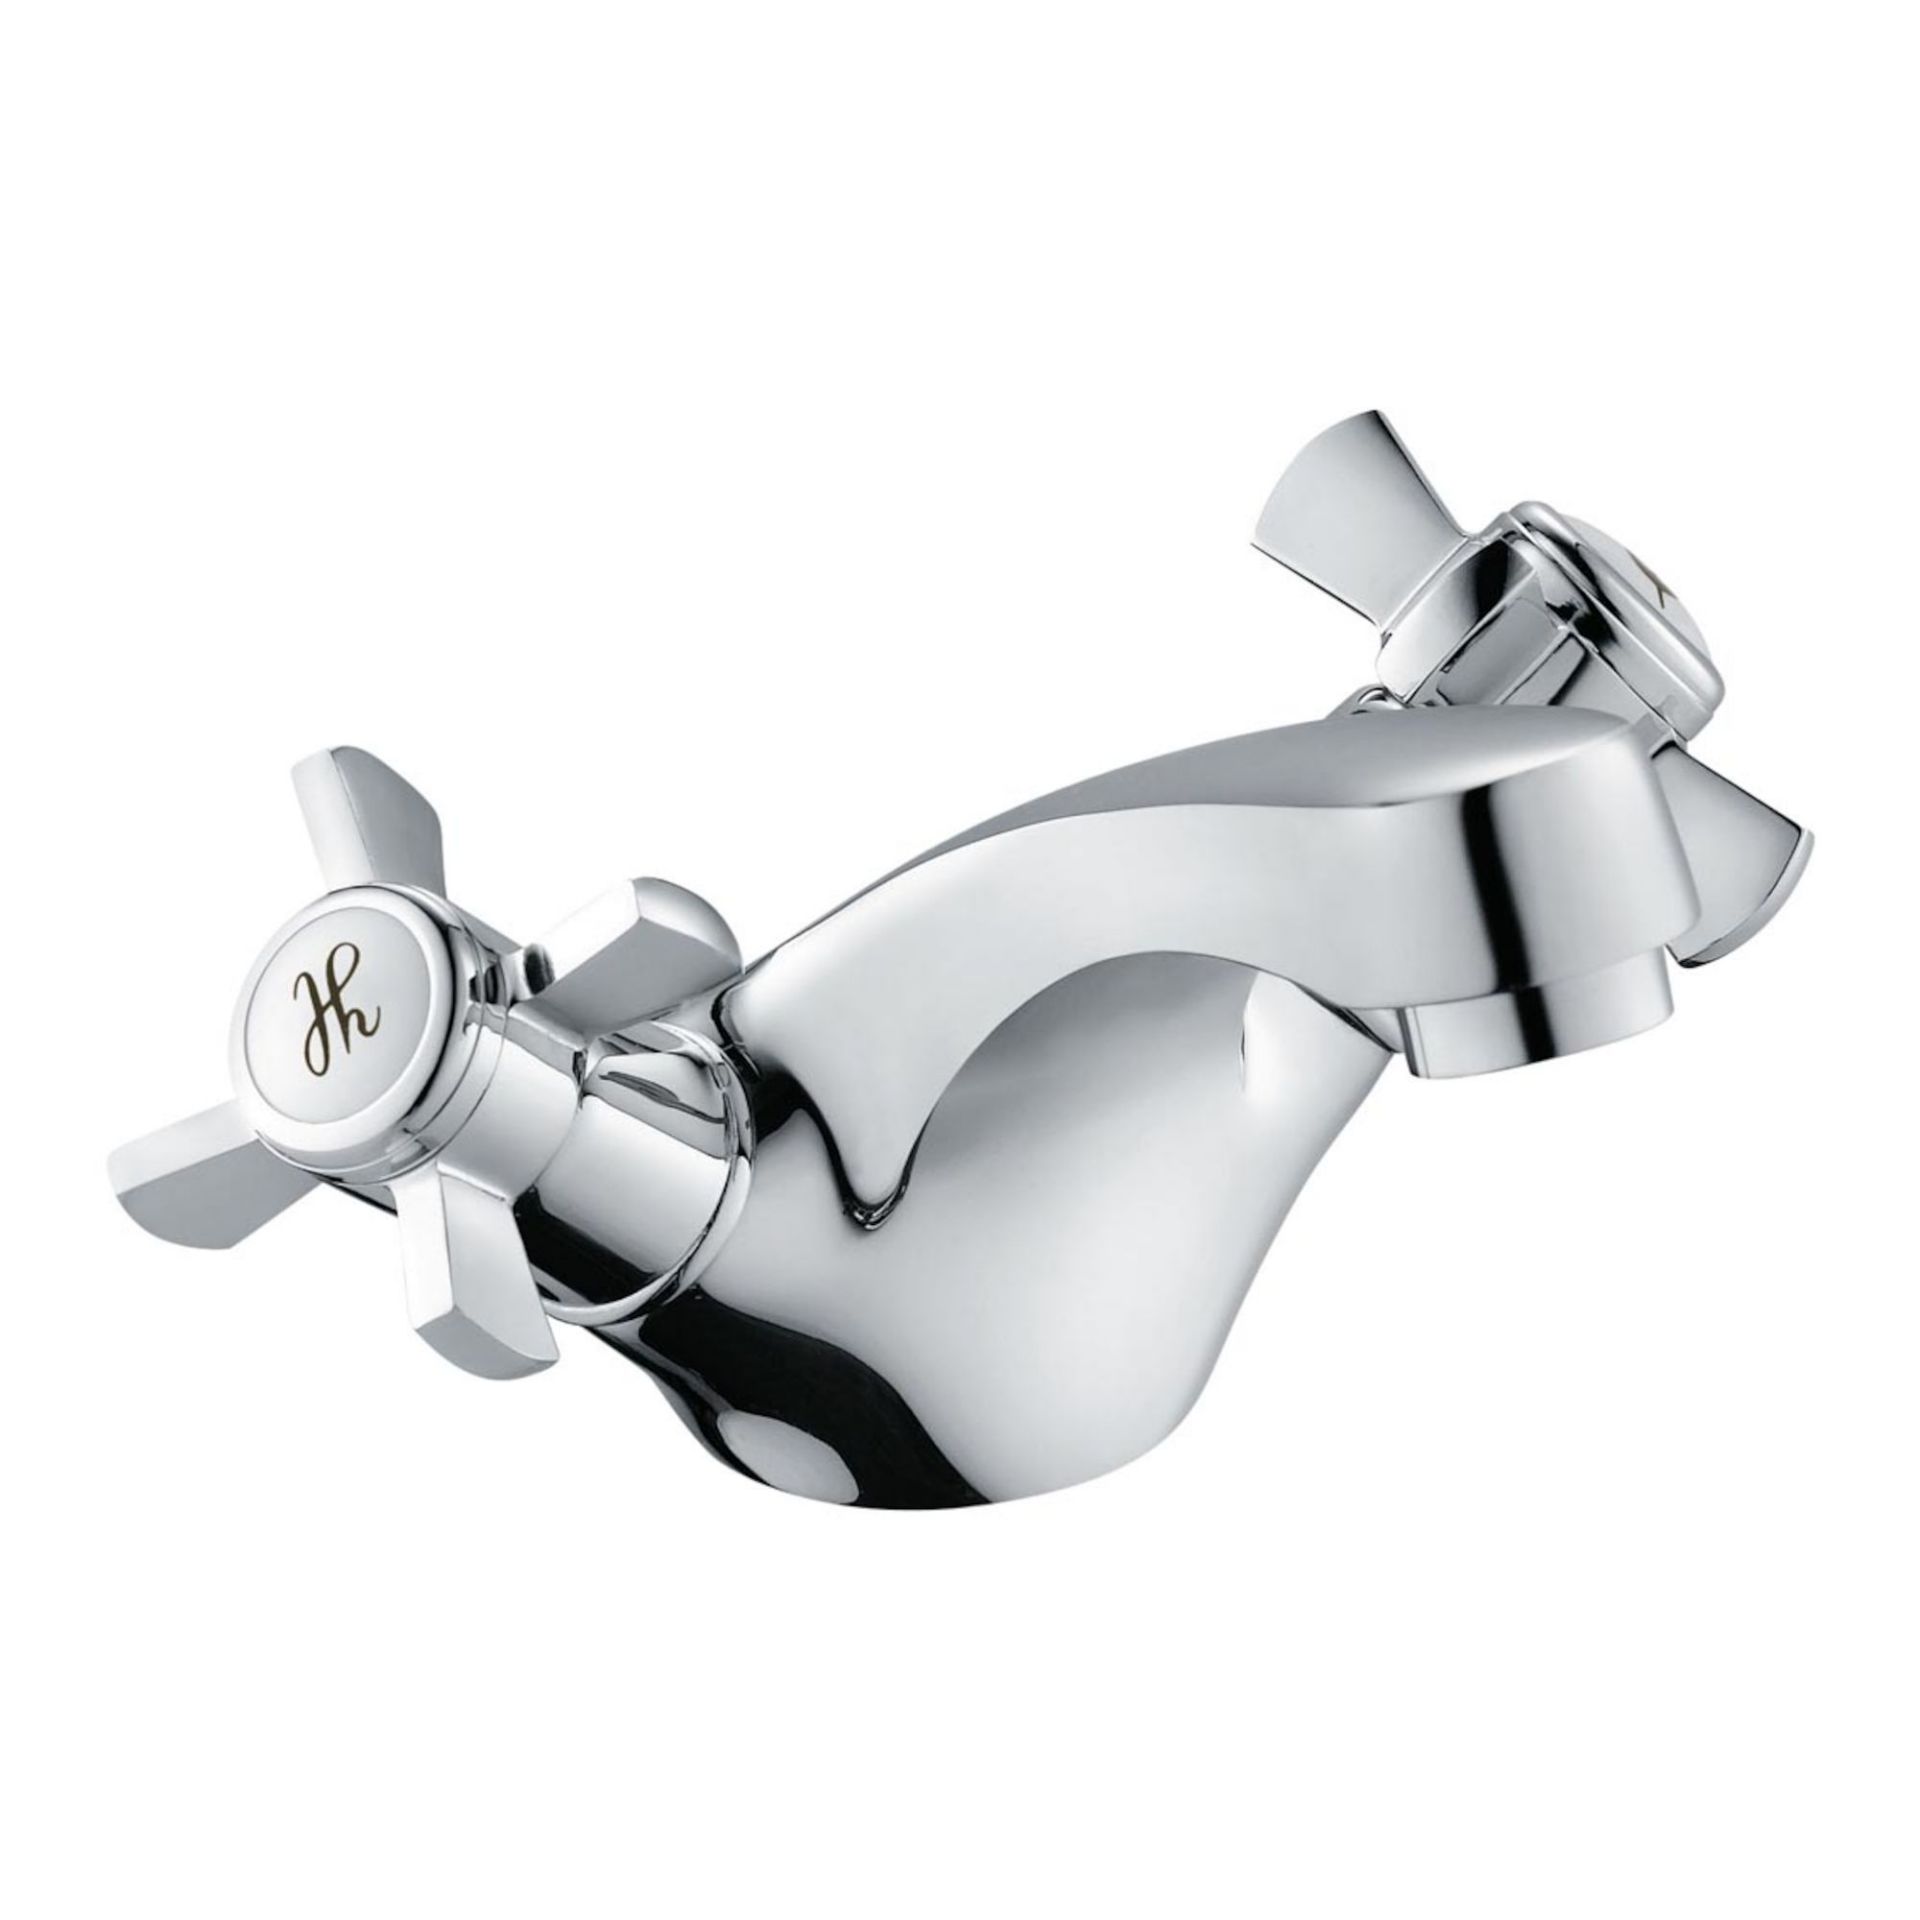 (EW152) Loxley Traditional Basin Mixer Tap Engineered from premium solid brass which is layered in - Image 4 of 7